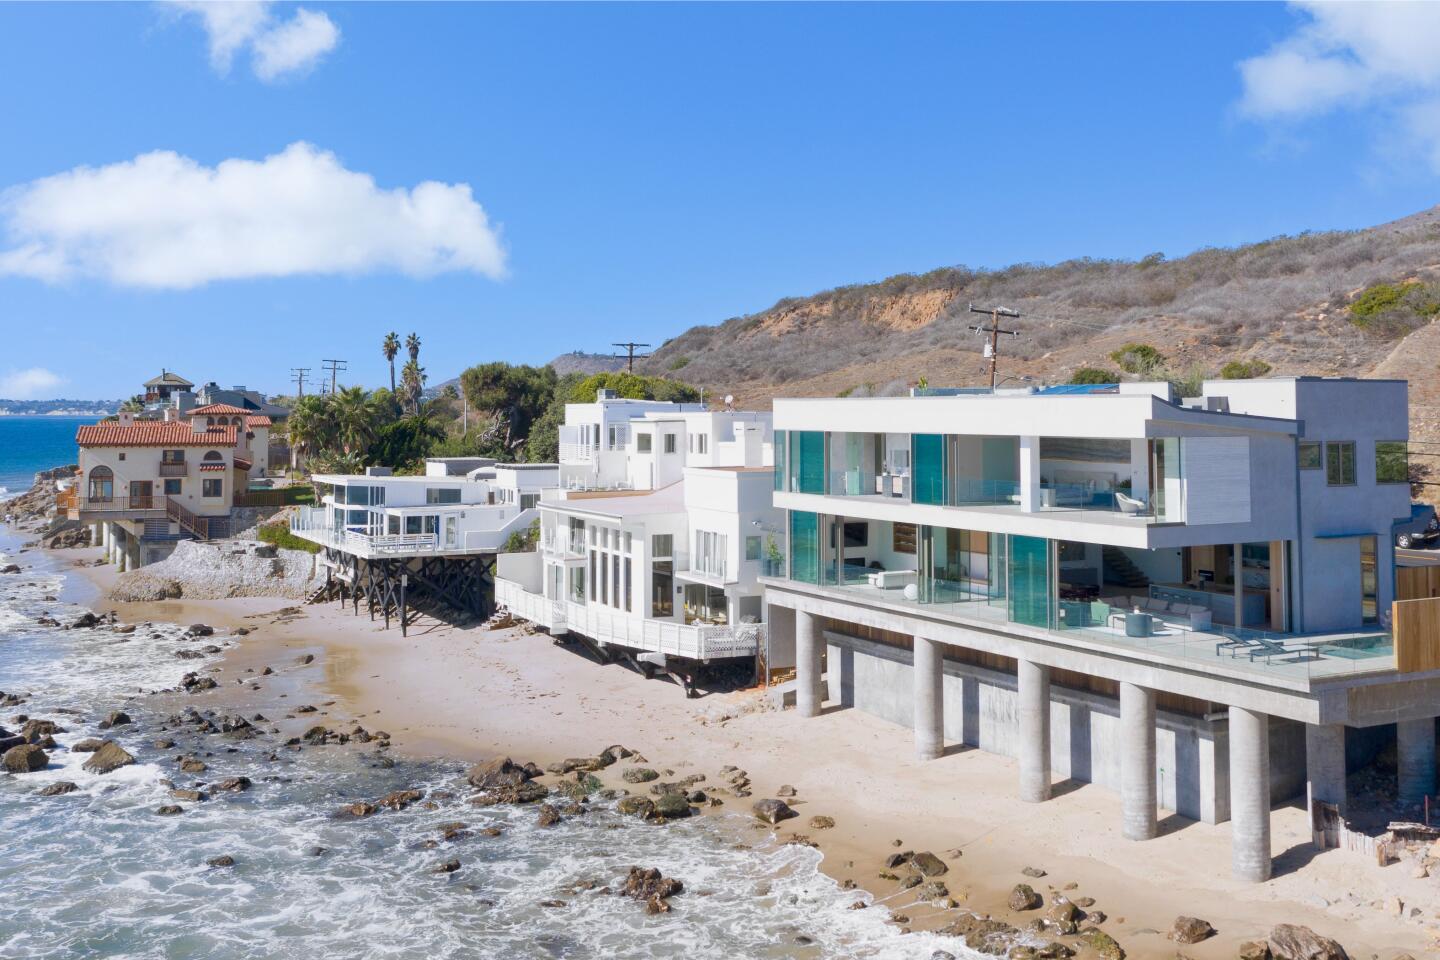 The oceanfront home.